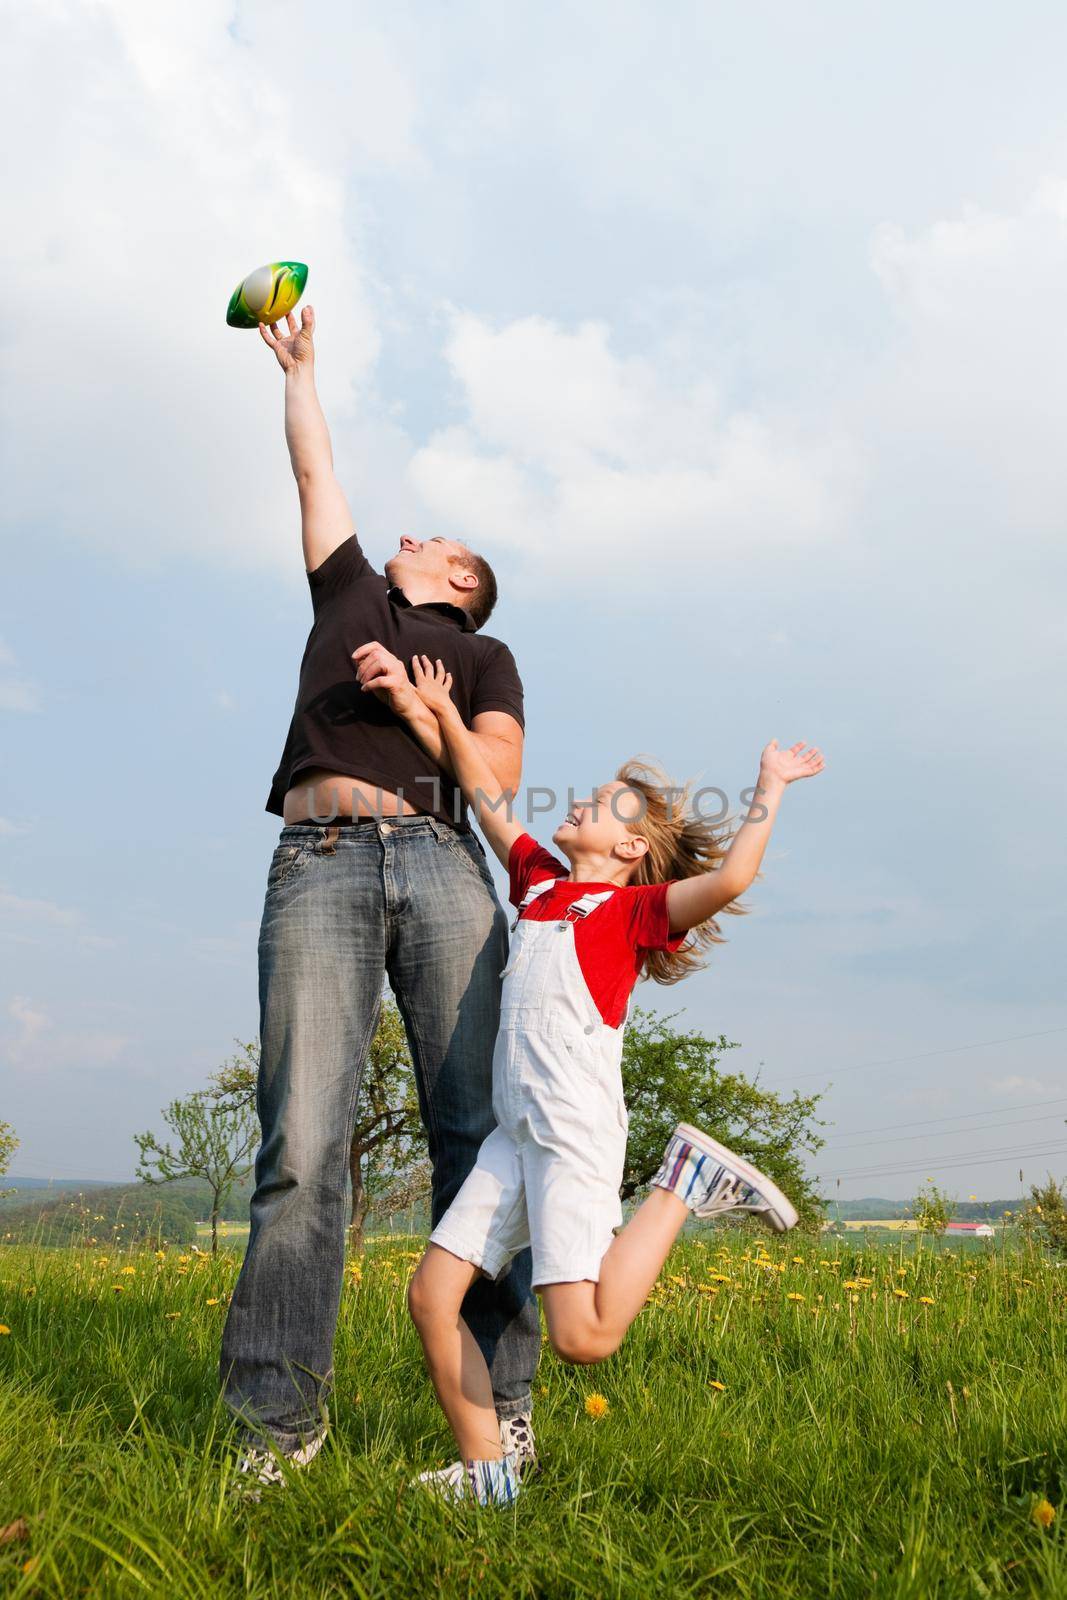 Family affairs - father and daughter playing football together